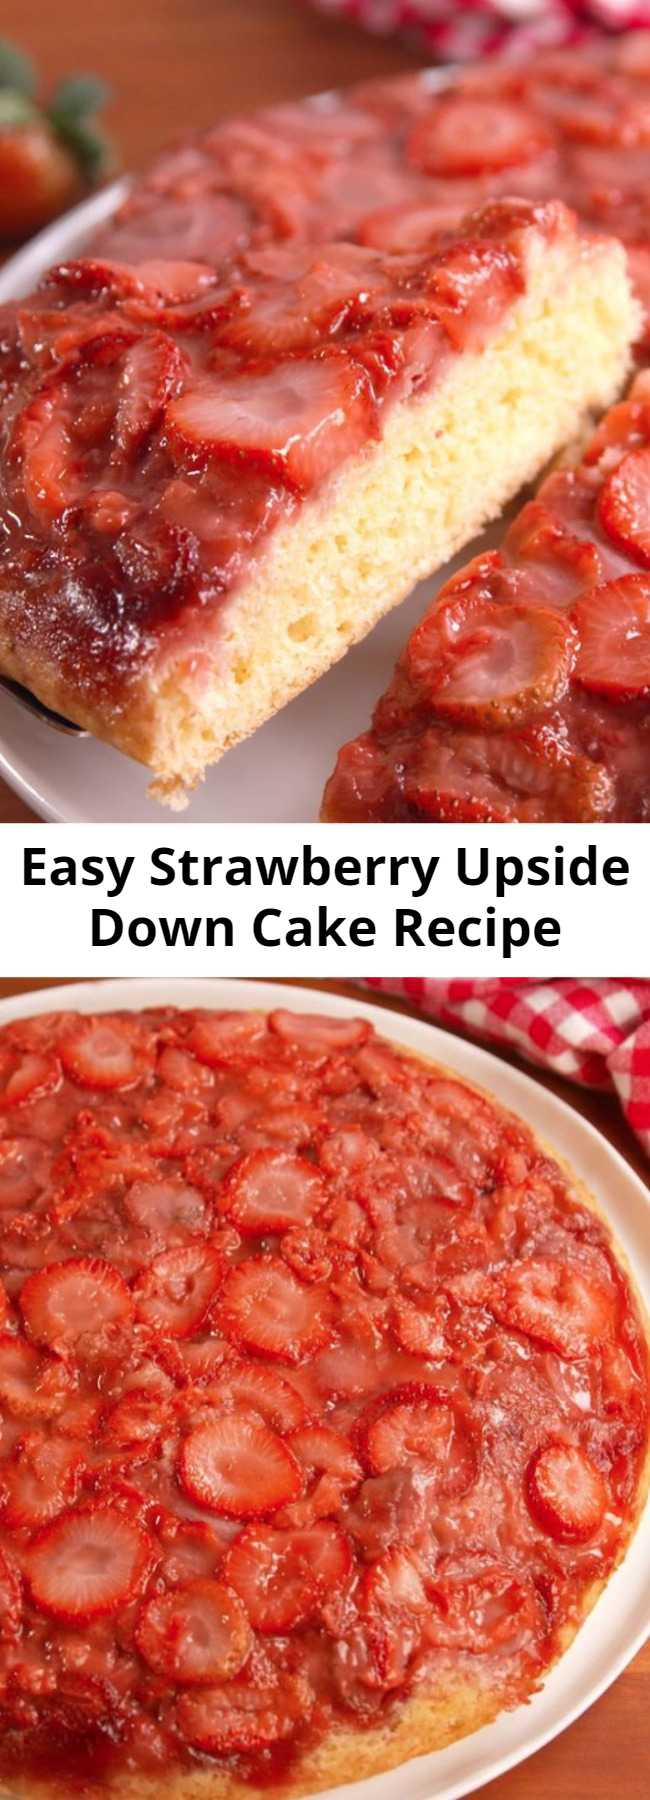 Easy Strawberry Upside Down Cake Recipe - This Strawberry Upside Down Cake is the official dessert of summer. If you don't have an oven-safe skillet, you can use a 12" cake pan!